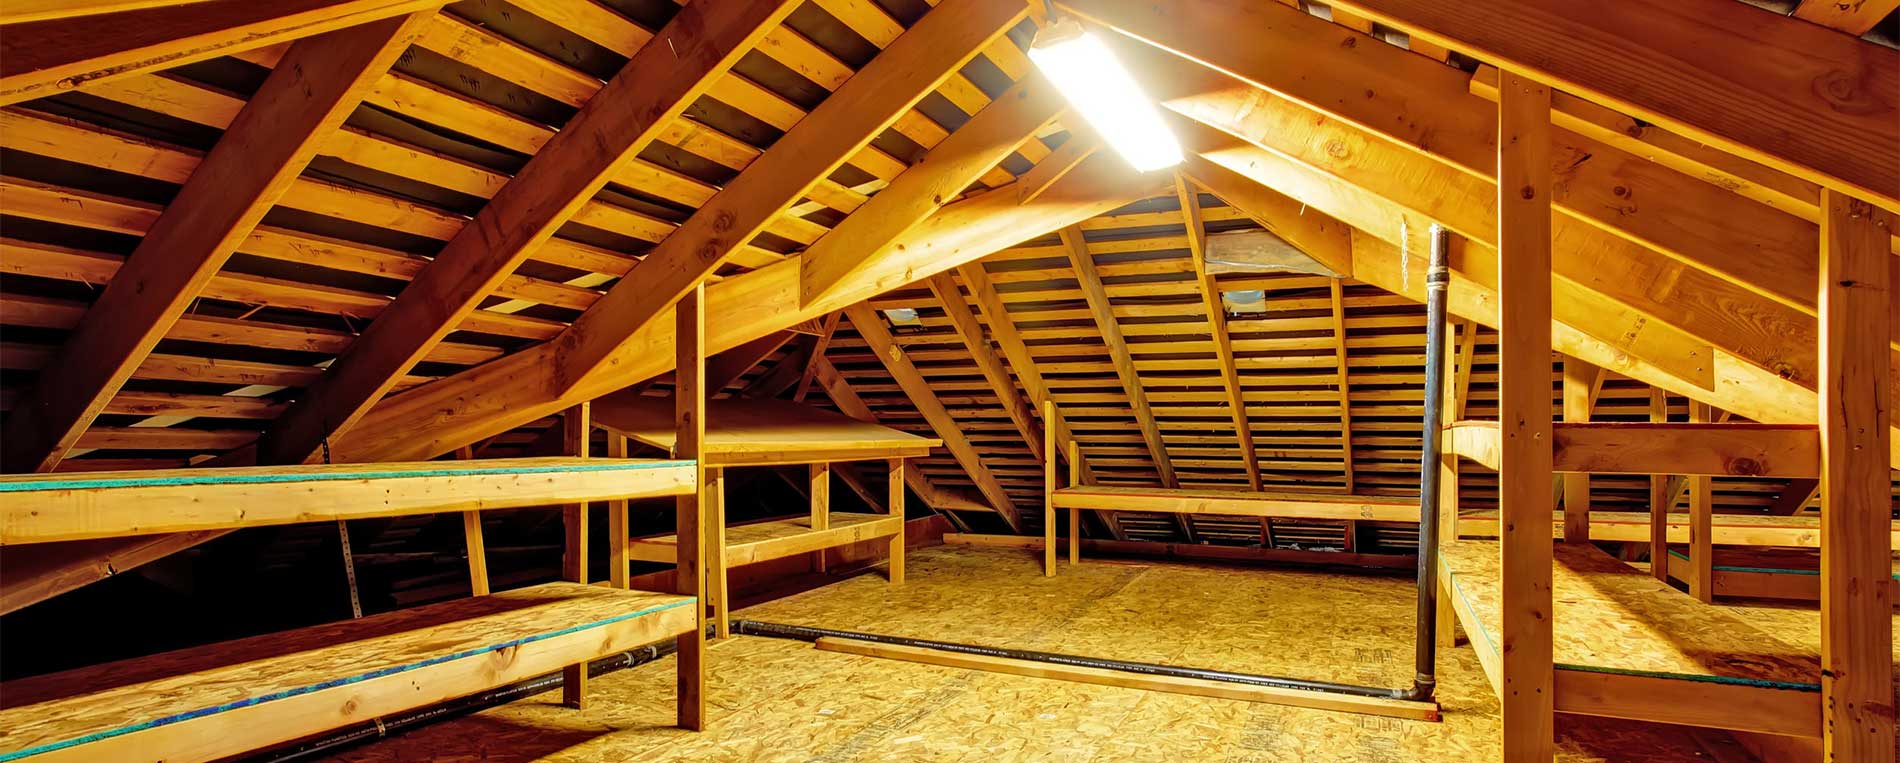 Cleaning your attic with the help of an expert attic cleaning company